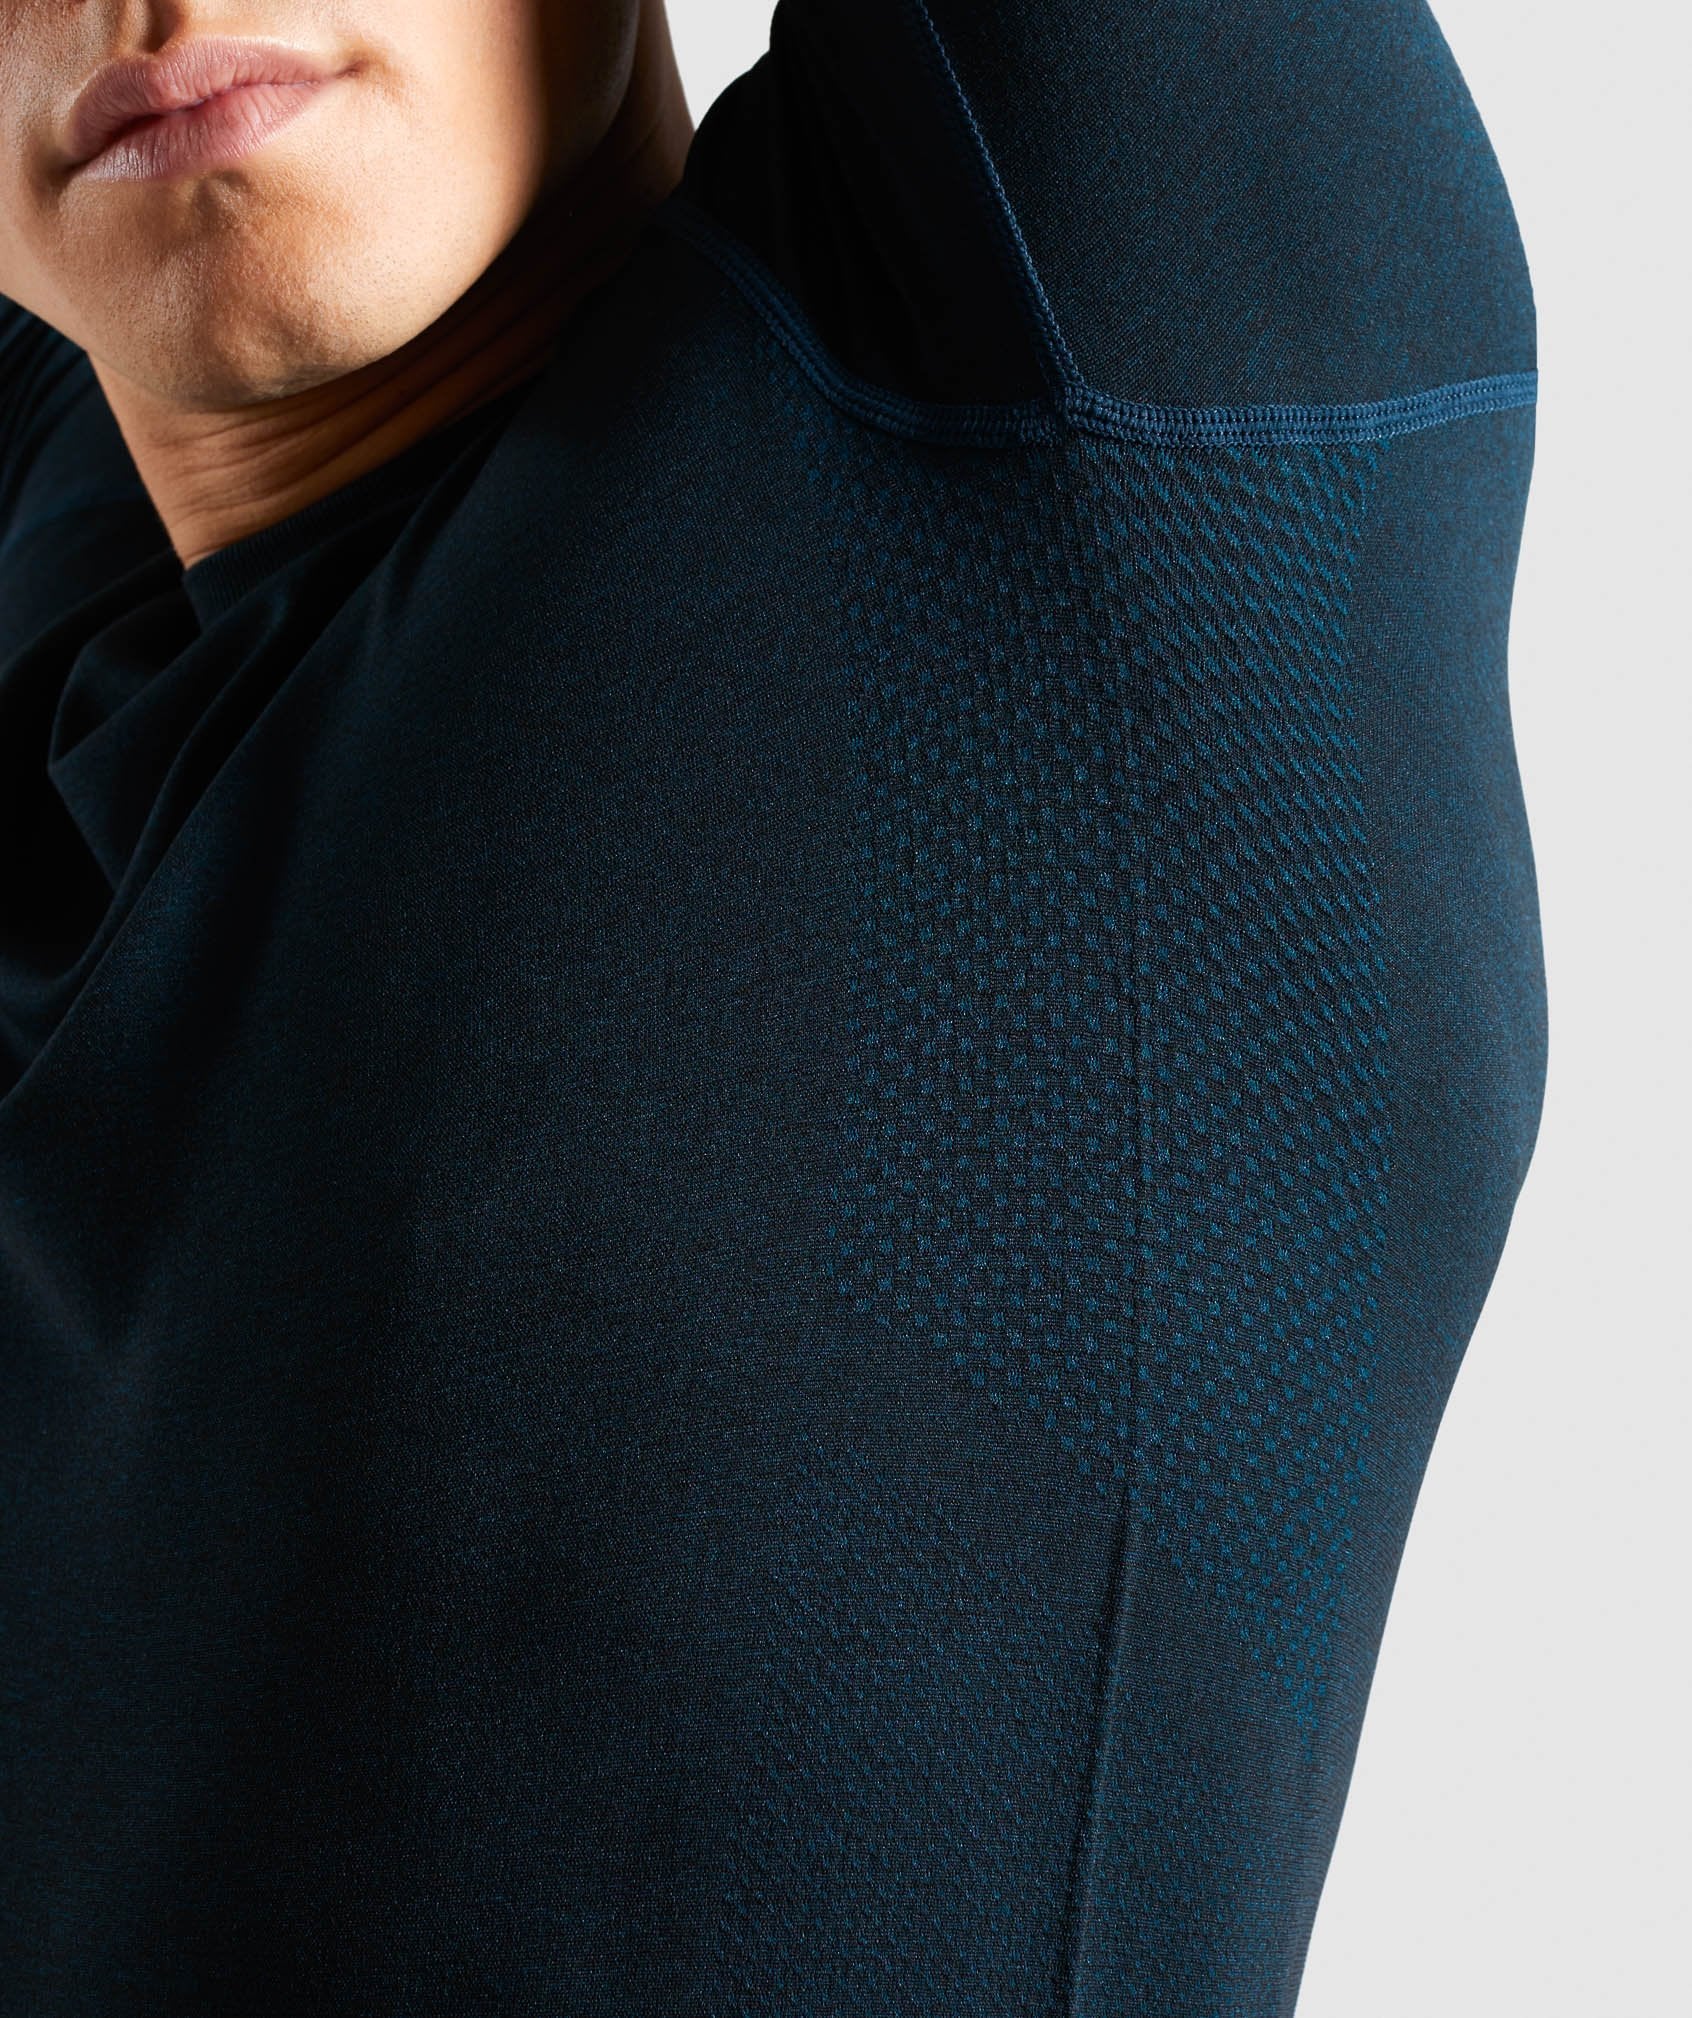 Define Seamless Long Sleeve T-Shirt in Blue - view 5